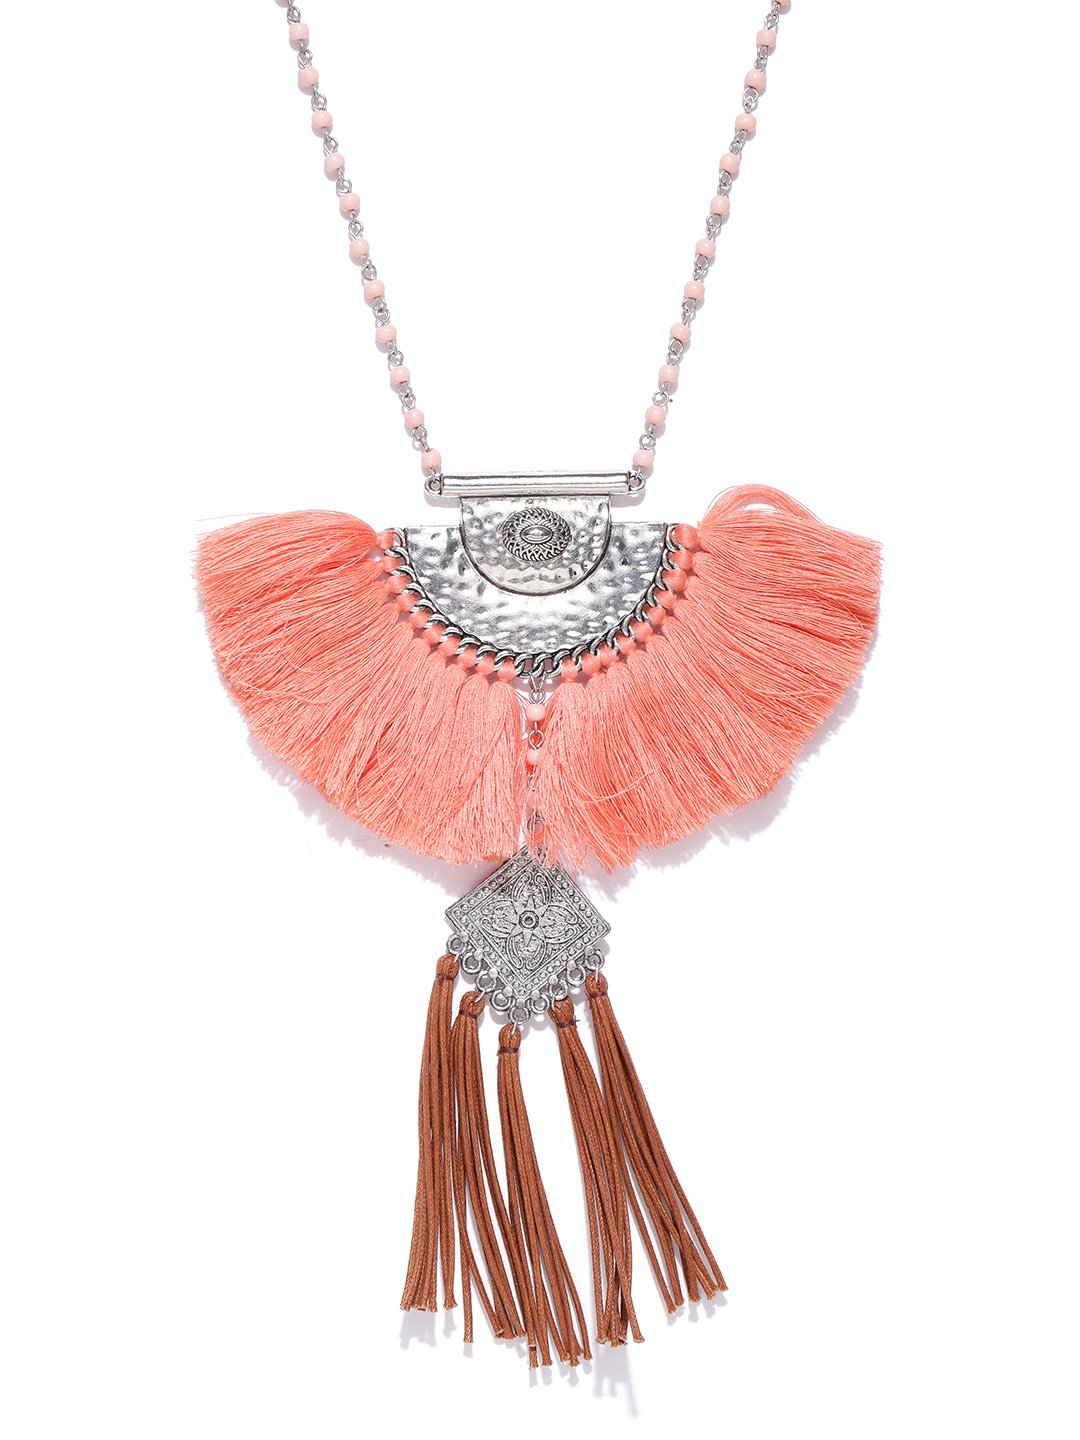 Blueberry peach toned beaded tassel tribal necklace